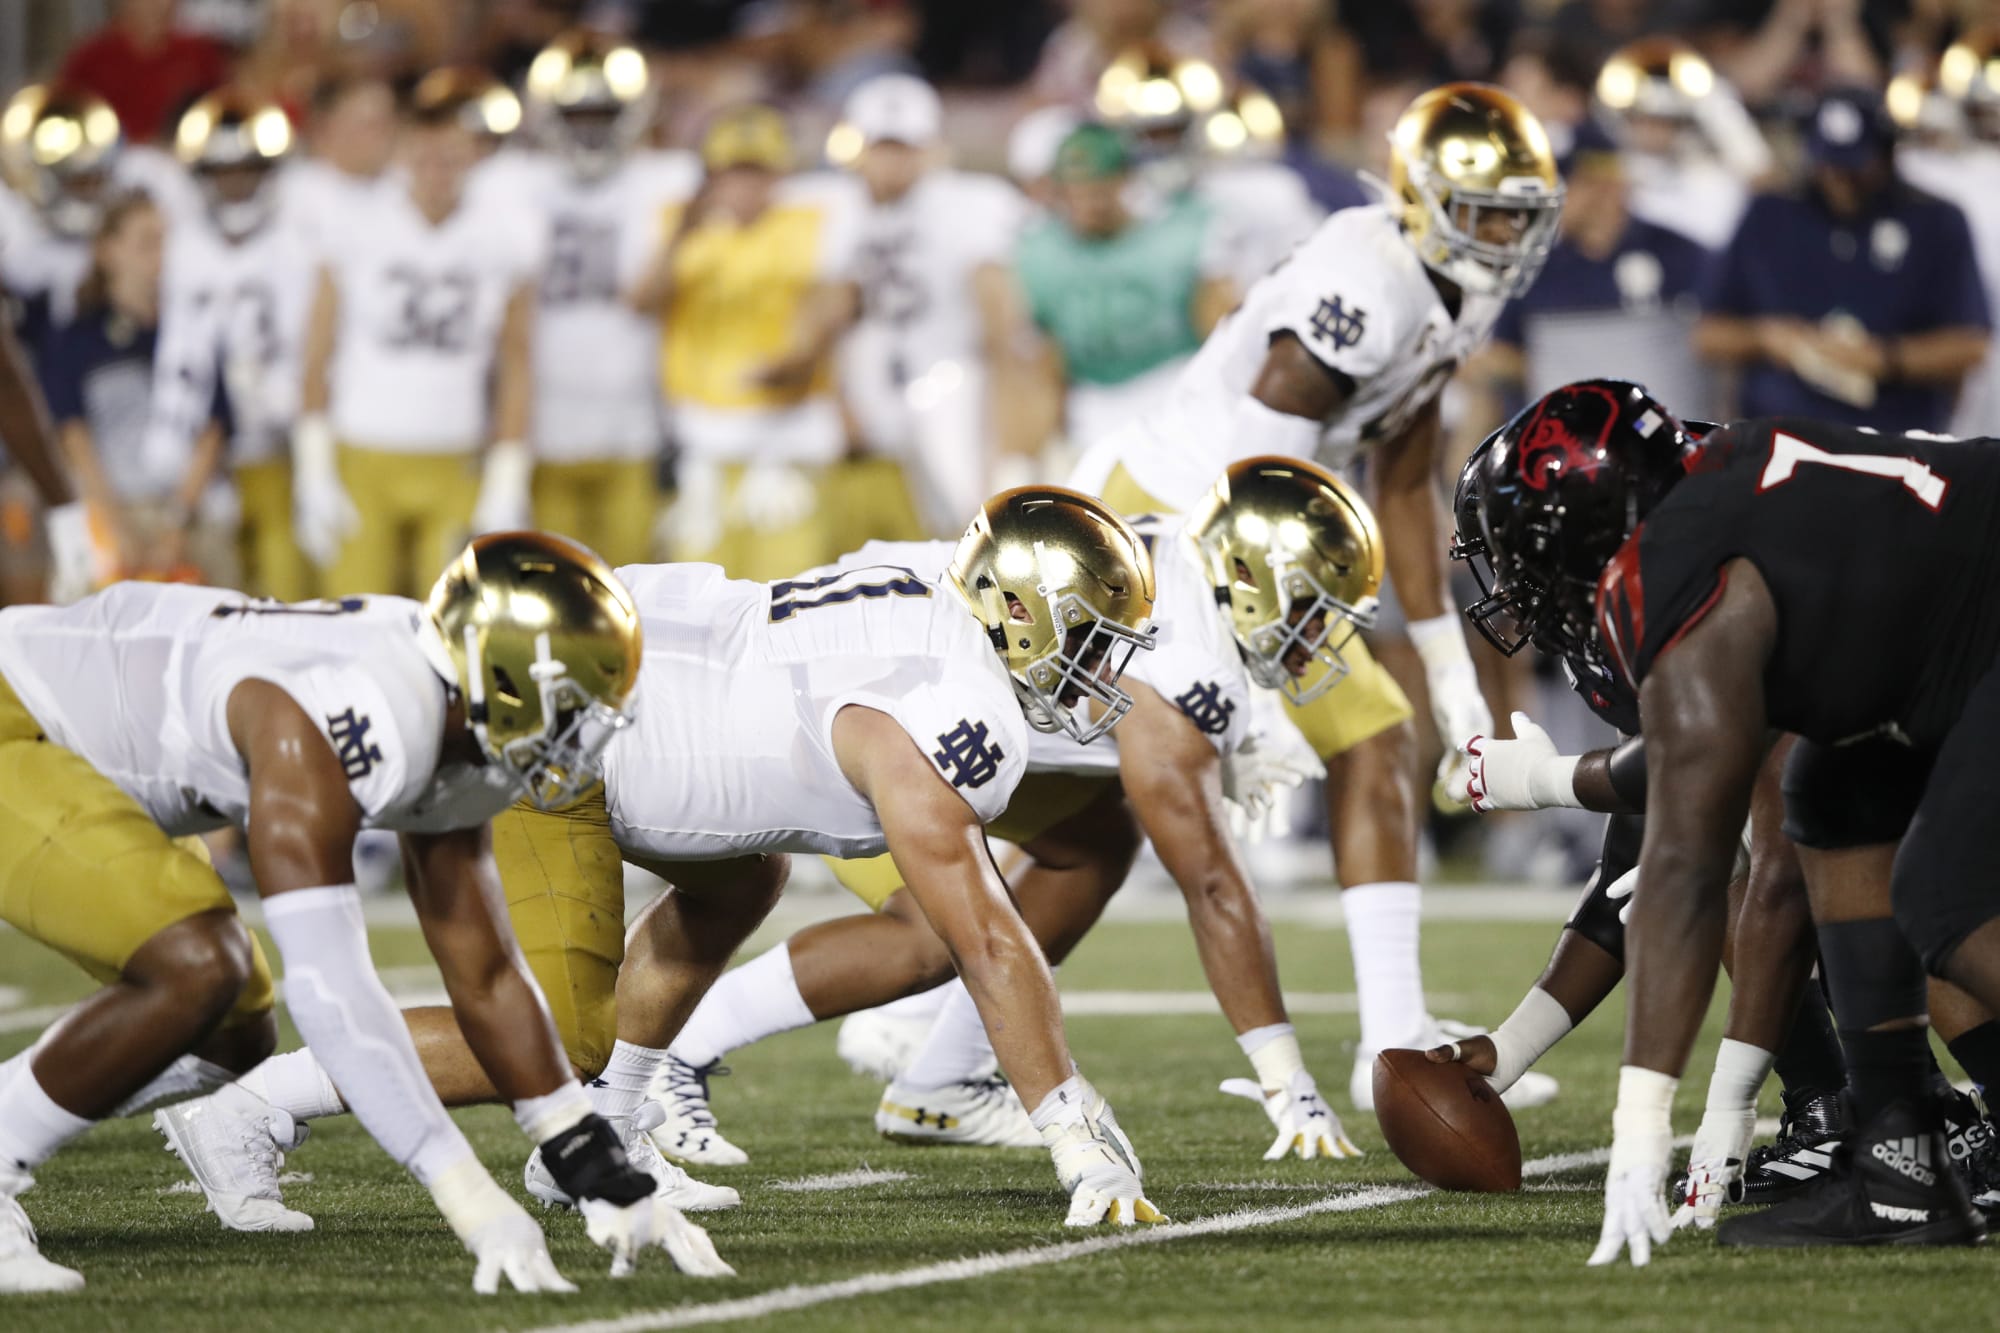 Notre Dame Football Play that changed everything against Louisville